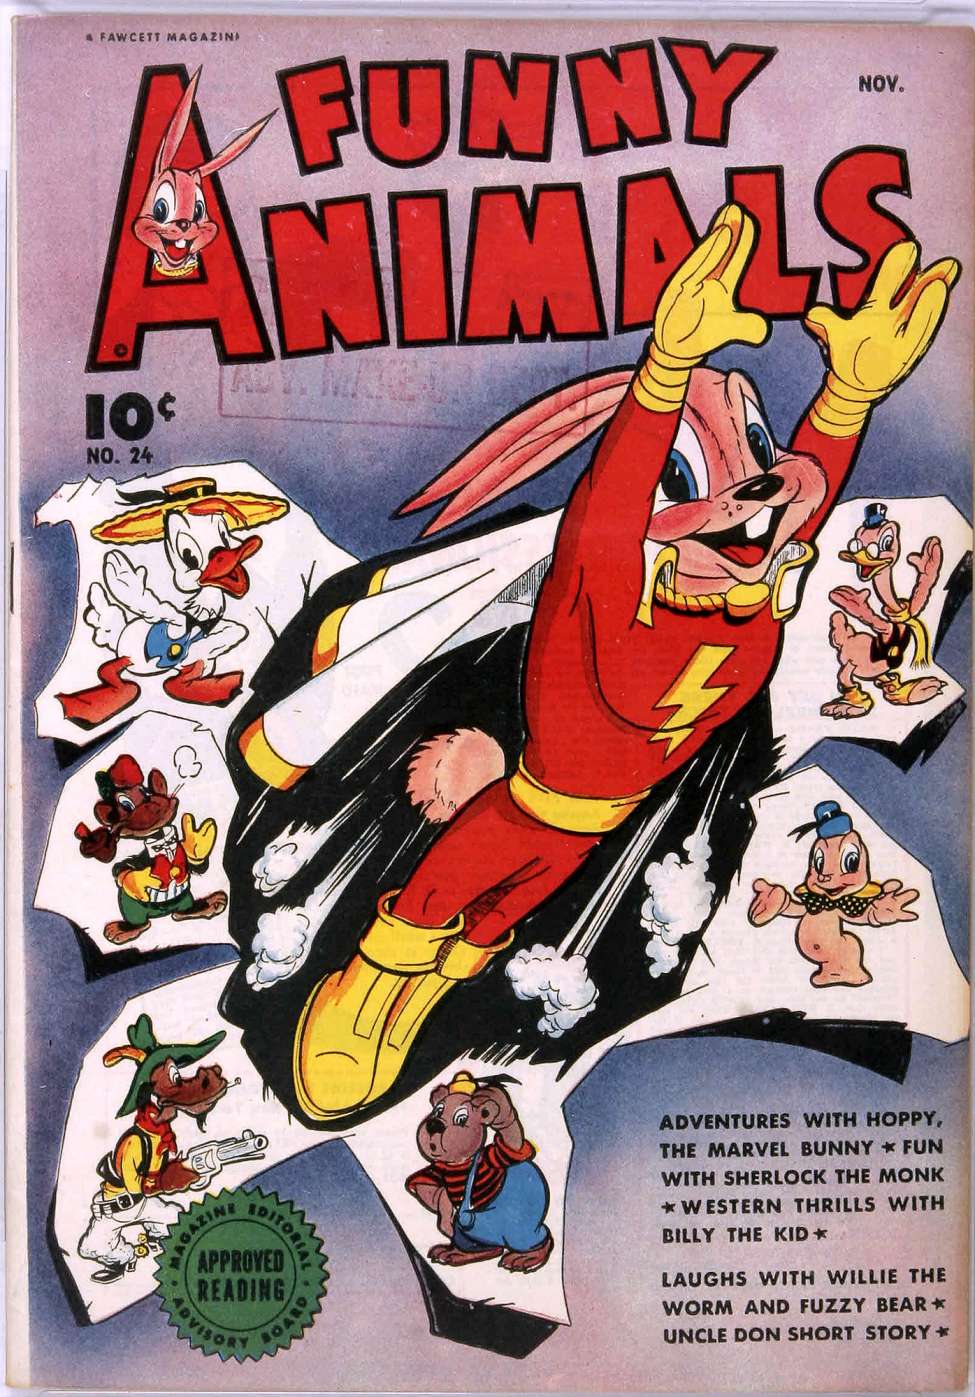 Book Cover For Fawcett's Funny Animals 24 - Version 1